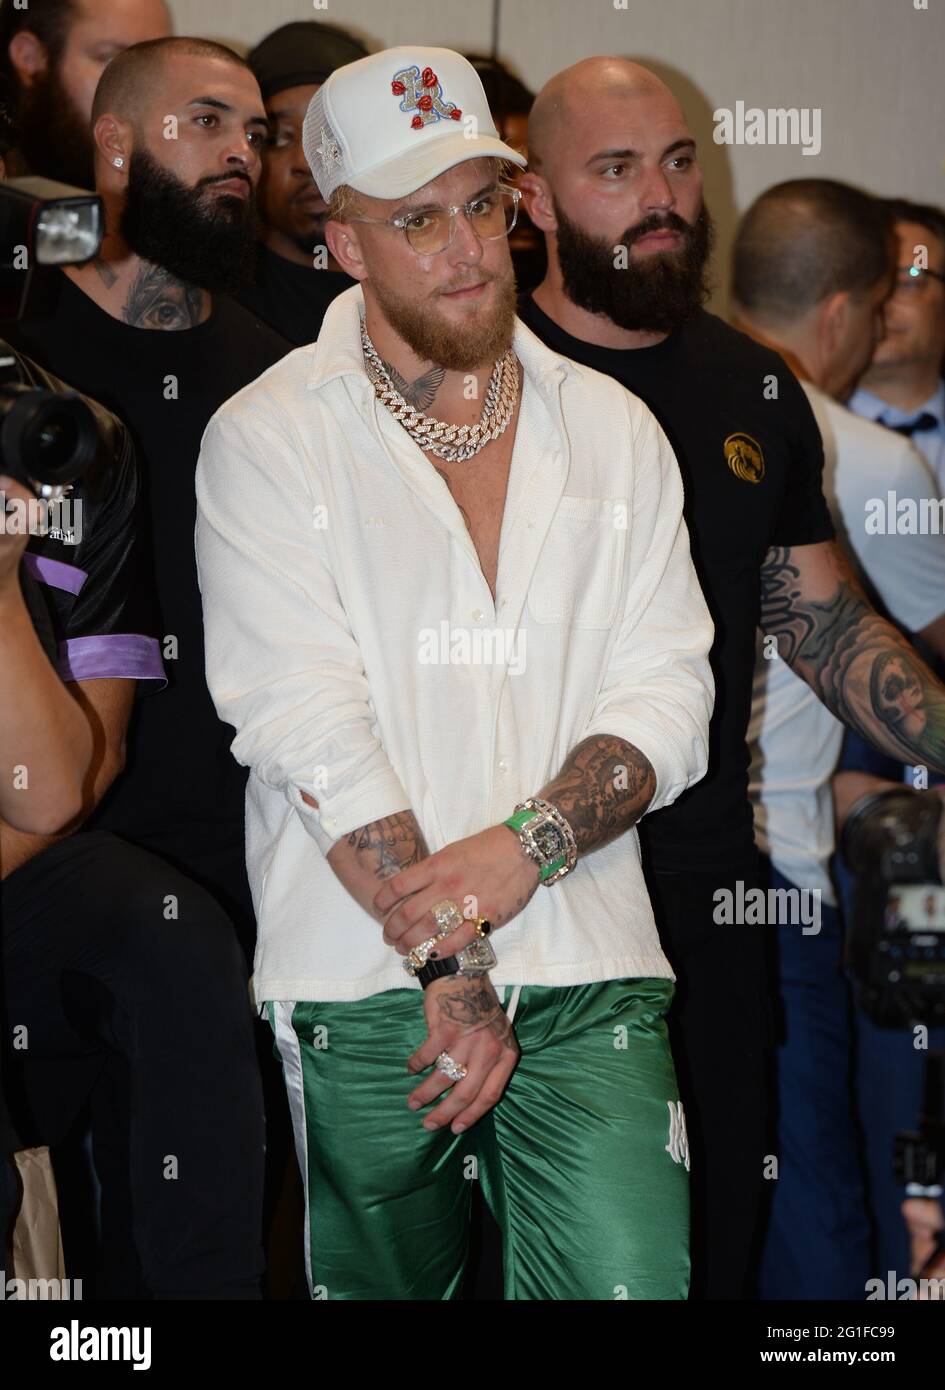 Miami Gardens FL, USA. 06th June, 2021. Jake Paul is seen as Logan Paul speaks during a press conference after his fight with Floyd Mayweather during their contracted exhibition boxing match at Hard Rock Stadium in Miami Gardens on June 6, 2021 in Miami Gardens, Florida. Credit: Mpi04/Media Punch/Alamy Live News Stock Photo